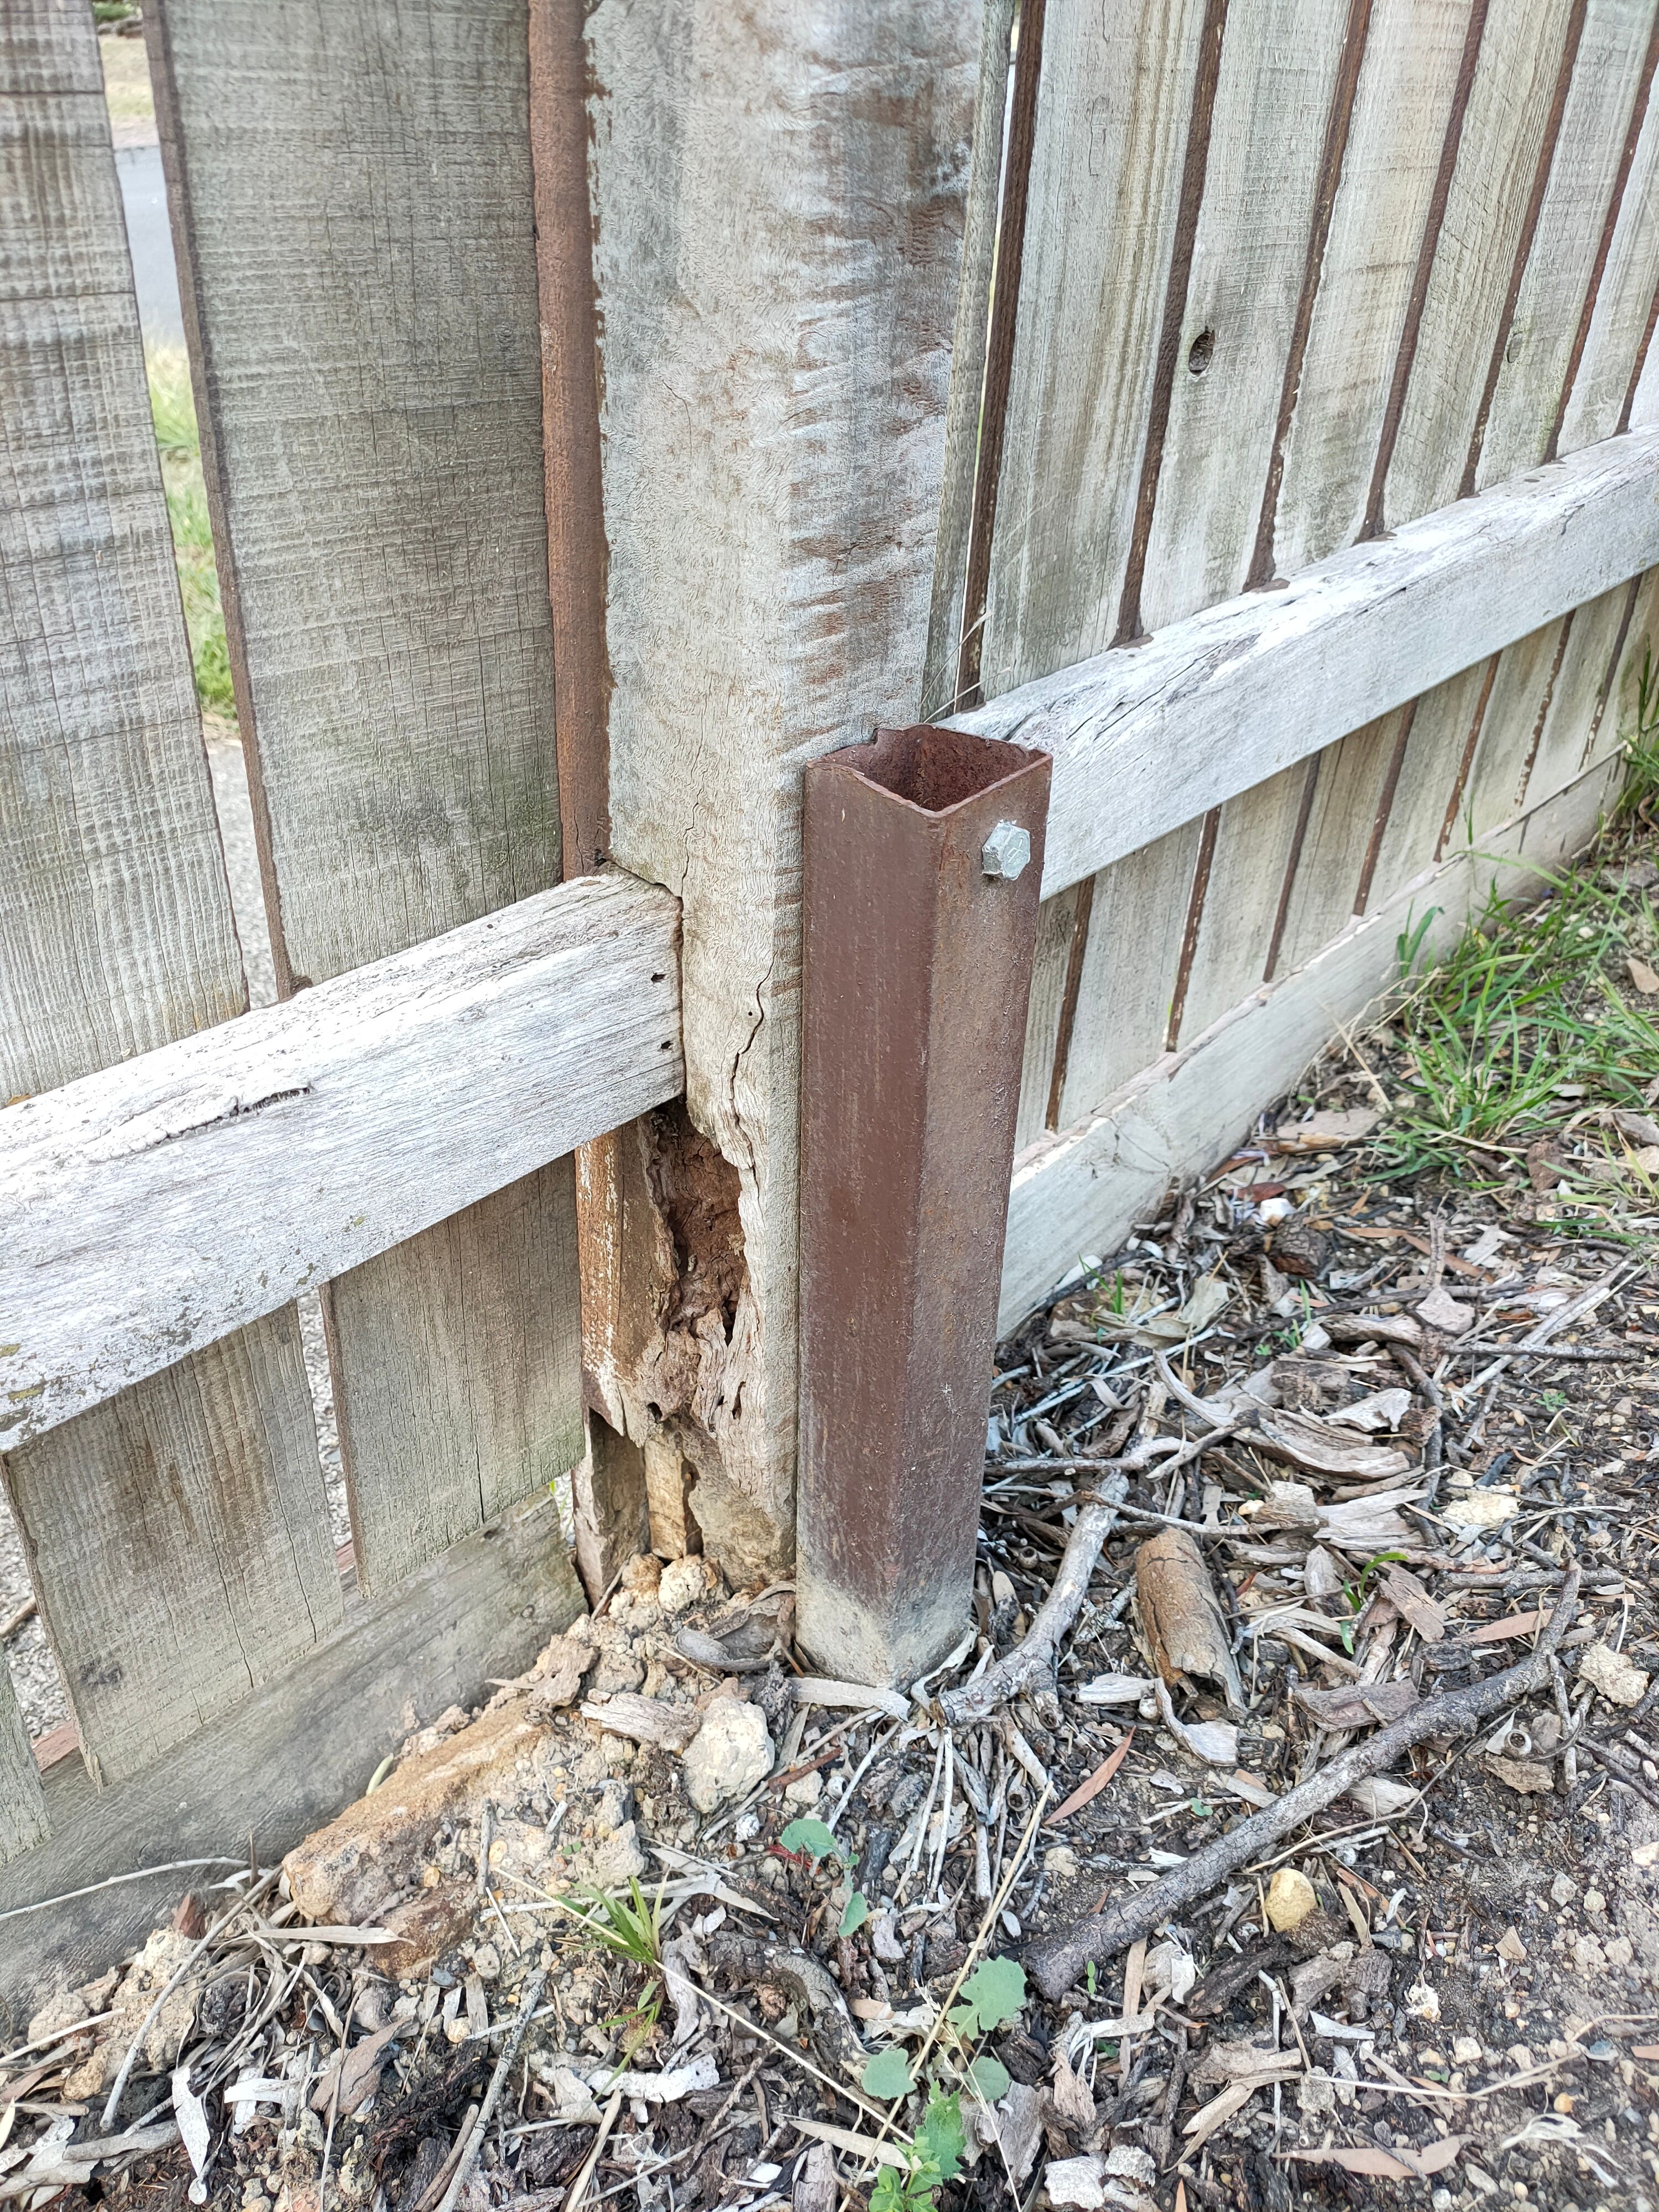 How to repair a rotting fence post?